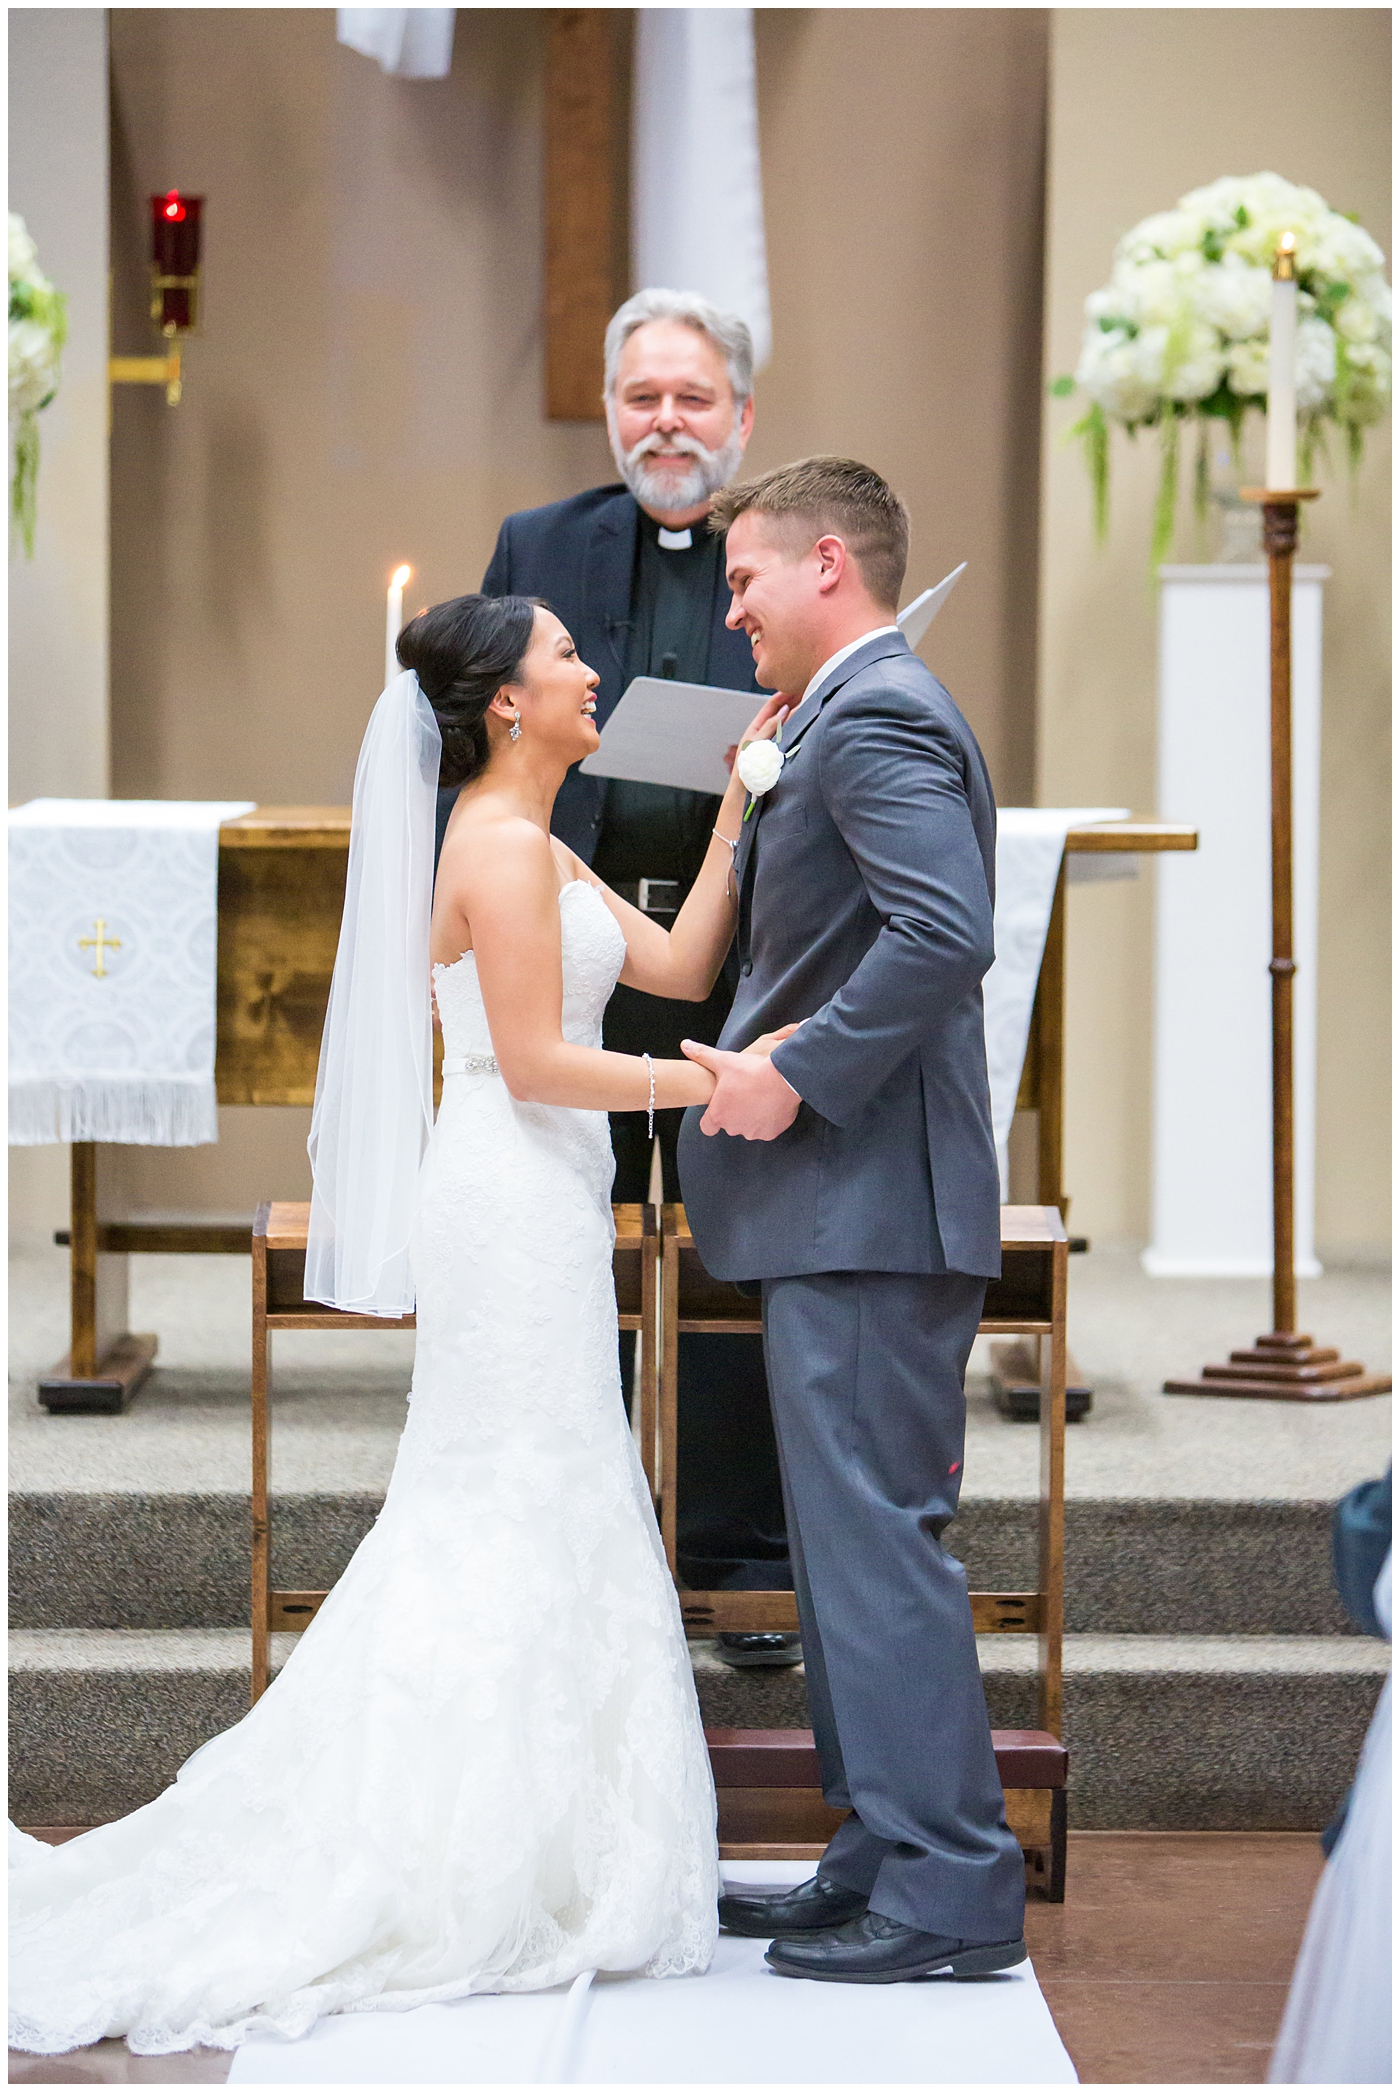 Bride in strapless maggie sorrento dress with soft white and pink roses, peonies, hydrangeas and greenery bouquet with groom in light gray suit with blue tie and white rose boutonniere during church wedding ceremony